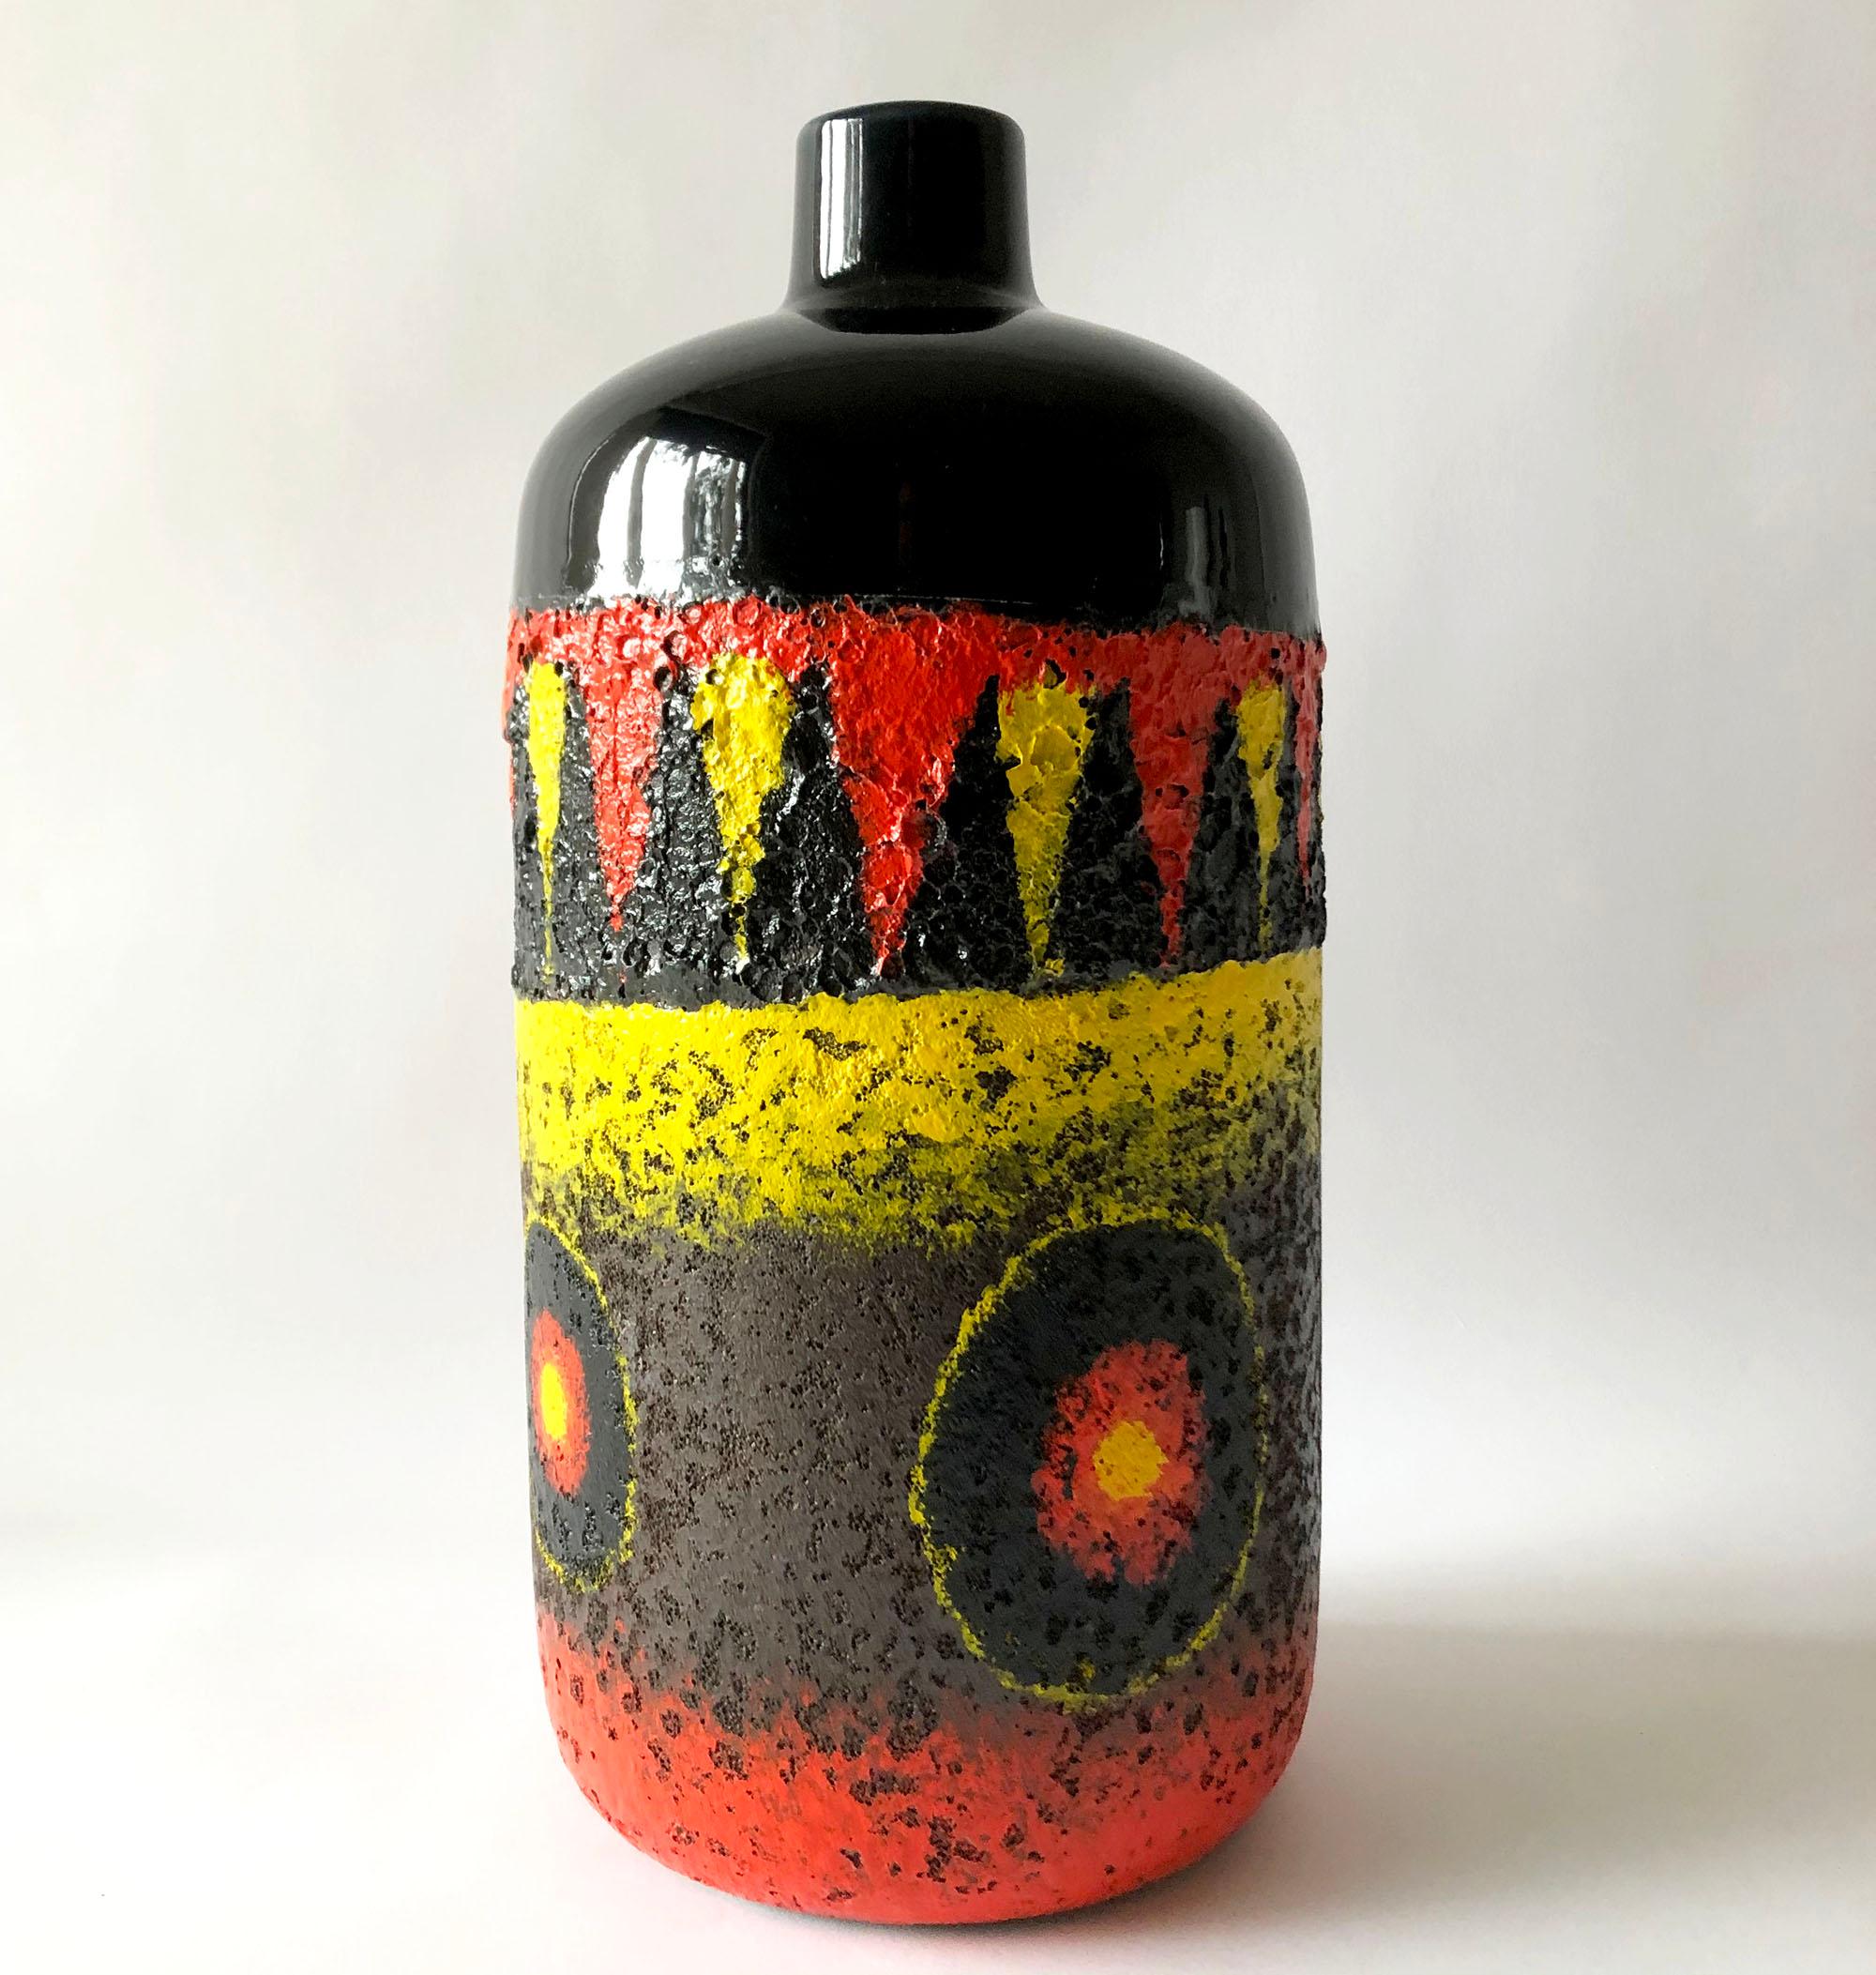 Colorful vase in striking contrasts of red, yellow and black. Vase measures 15.5